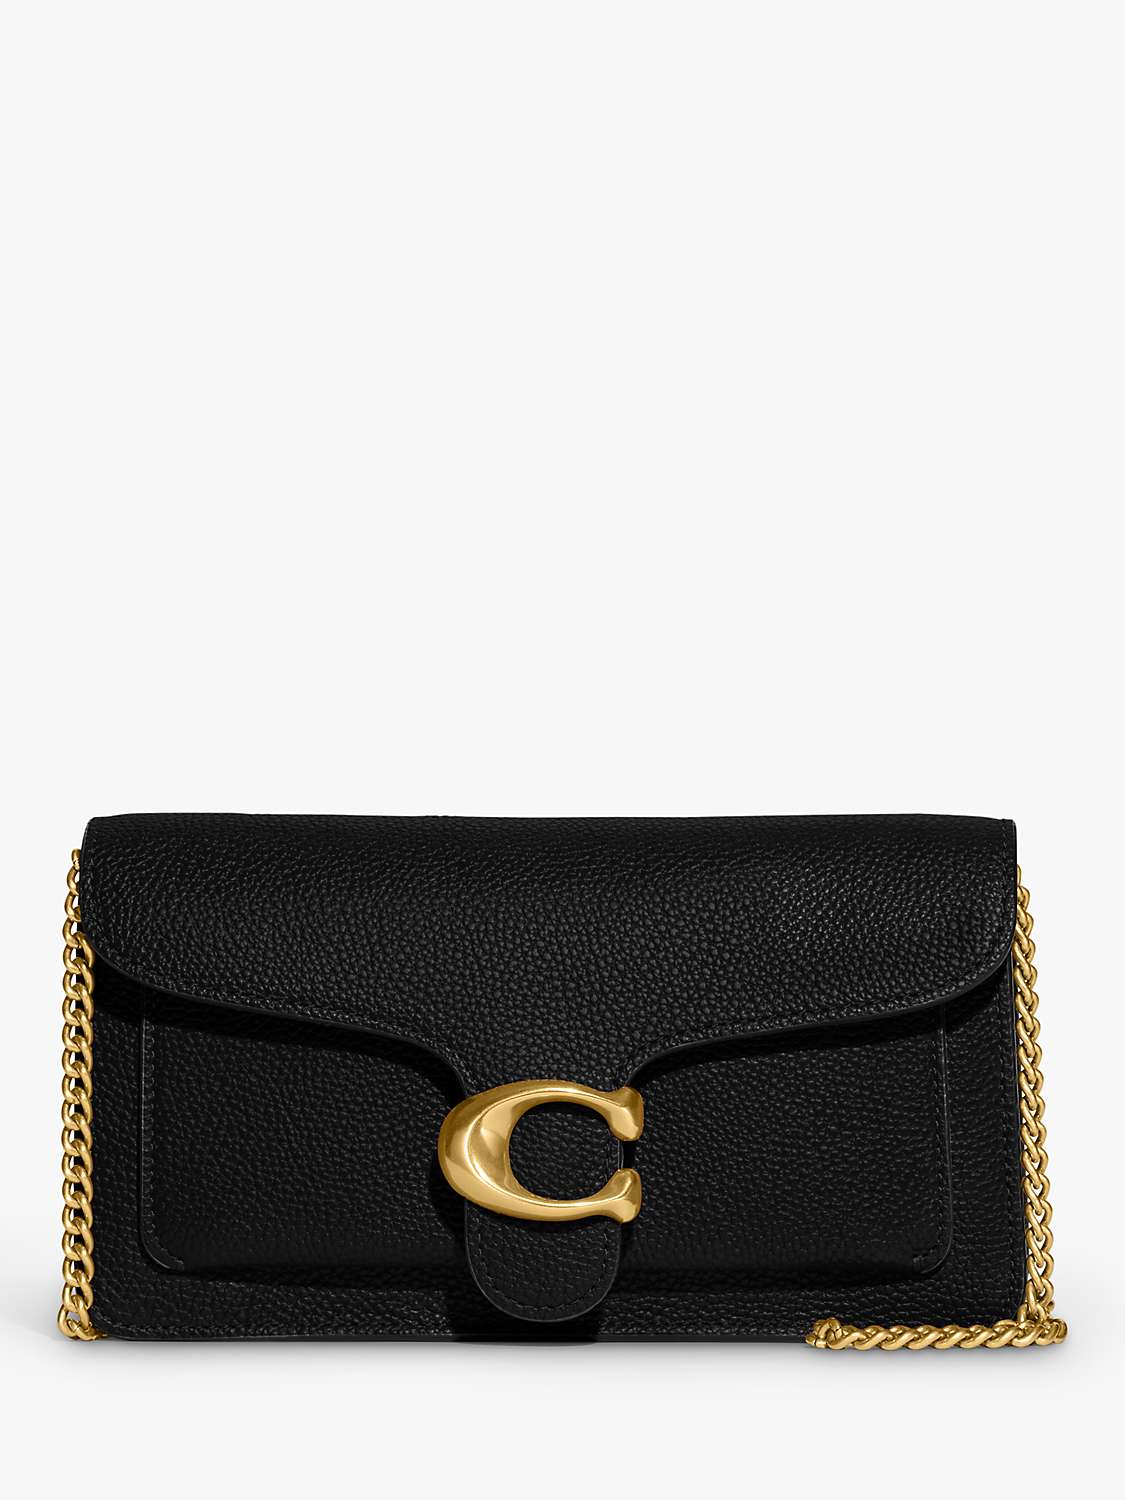 Buy Coach Tabby Chain Leather Clutch Bag Online at johnlewis.com